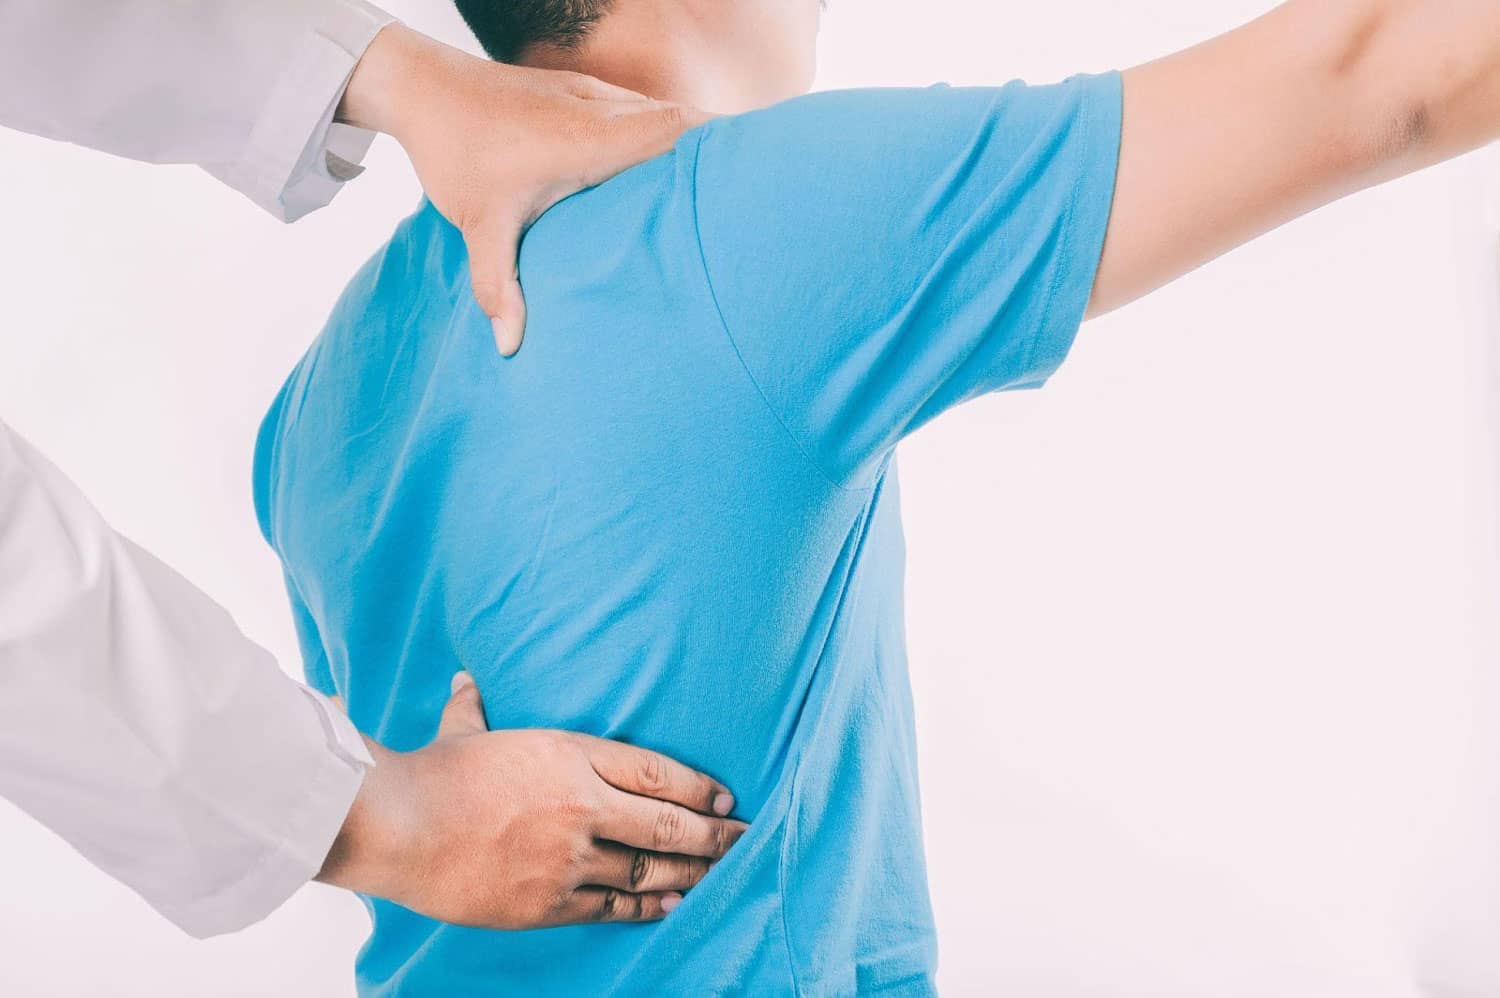 A man in a blue shirt receiving chiropractic treatment after a car accident.